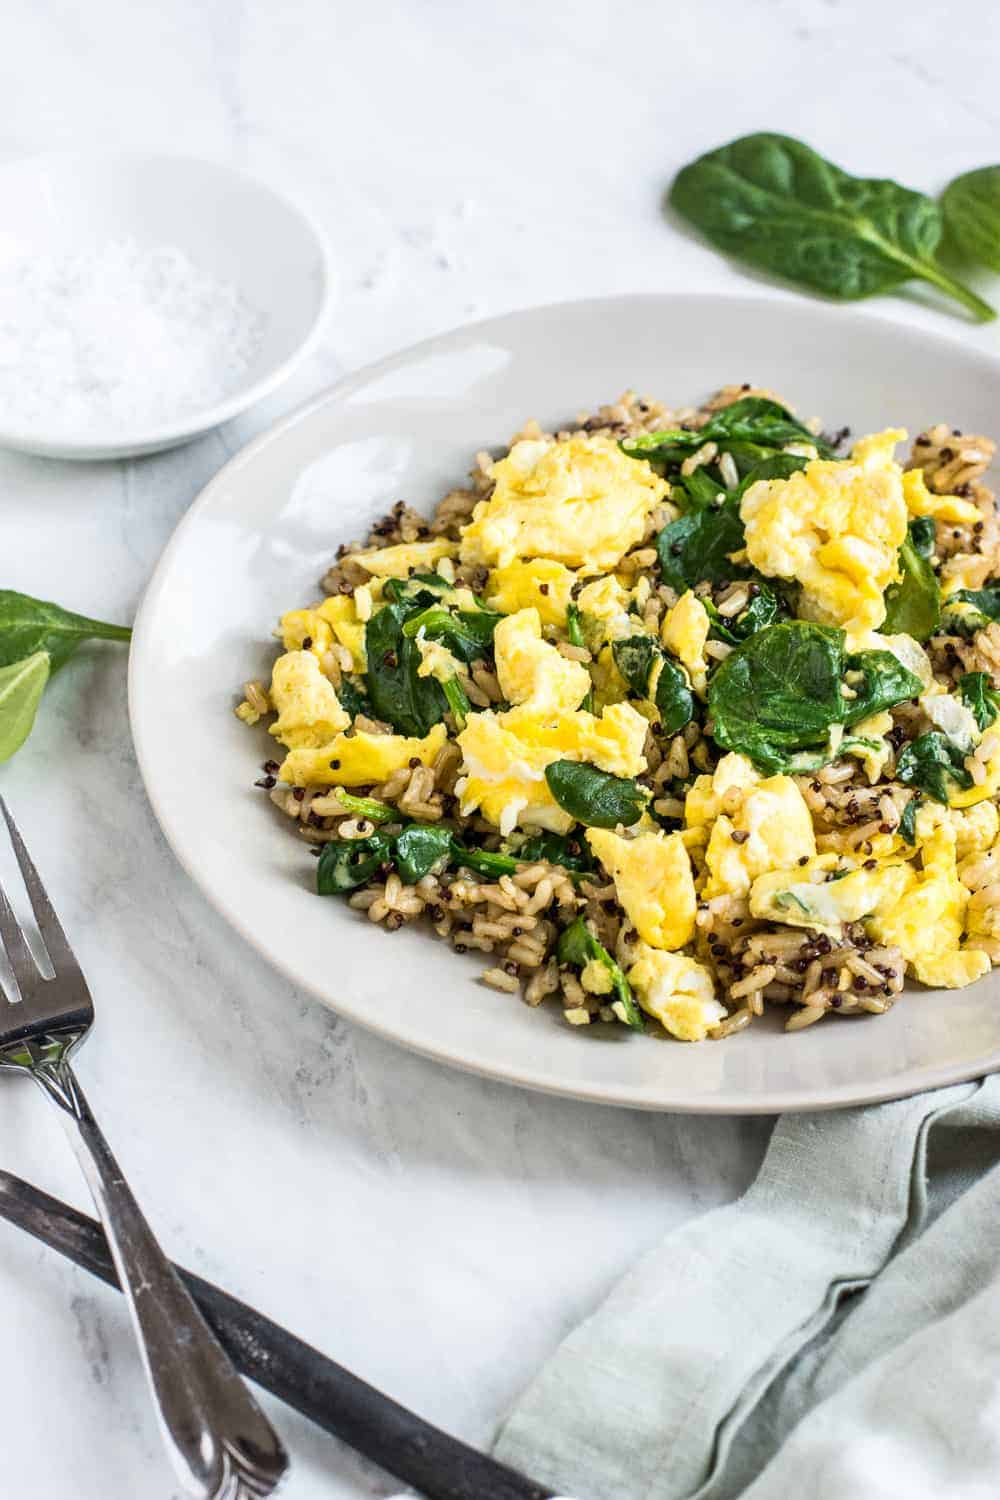 Up close shot of yellow scrambled eggs, brown rice, and cooked spinach